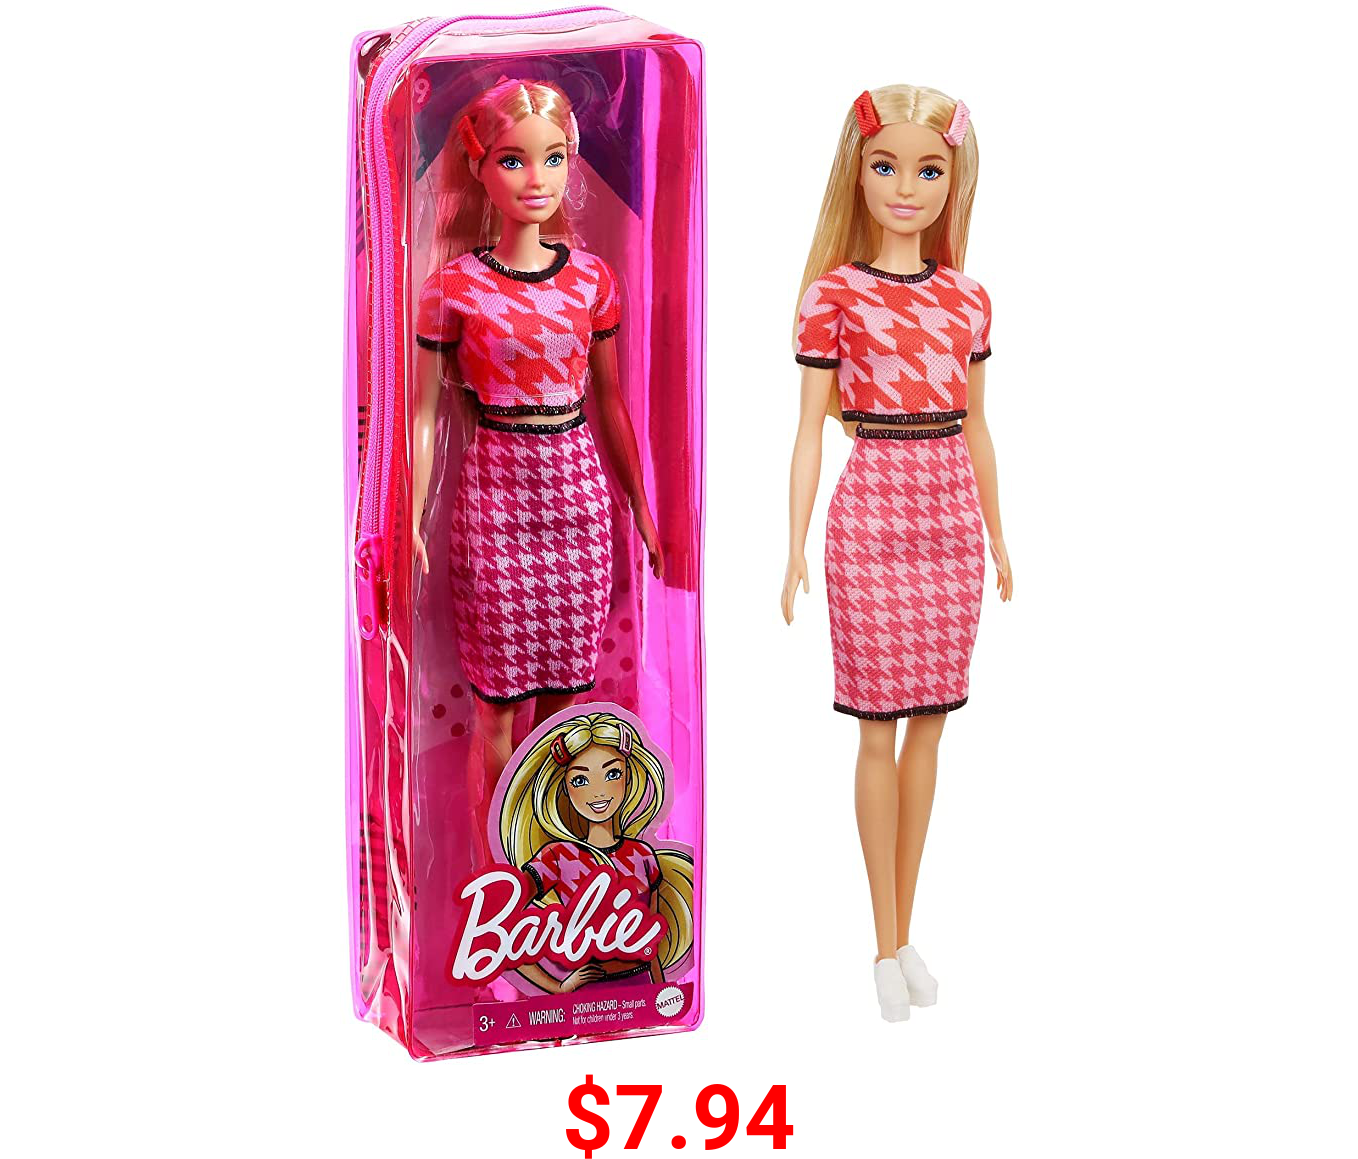 Barbie Fashionistas Dolls, Toy for Kids 3 to 8 Years Old